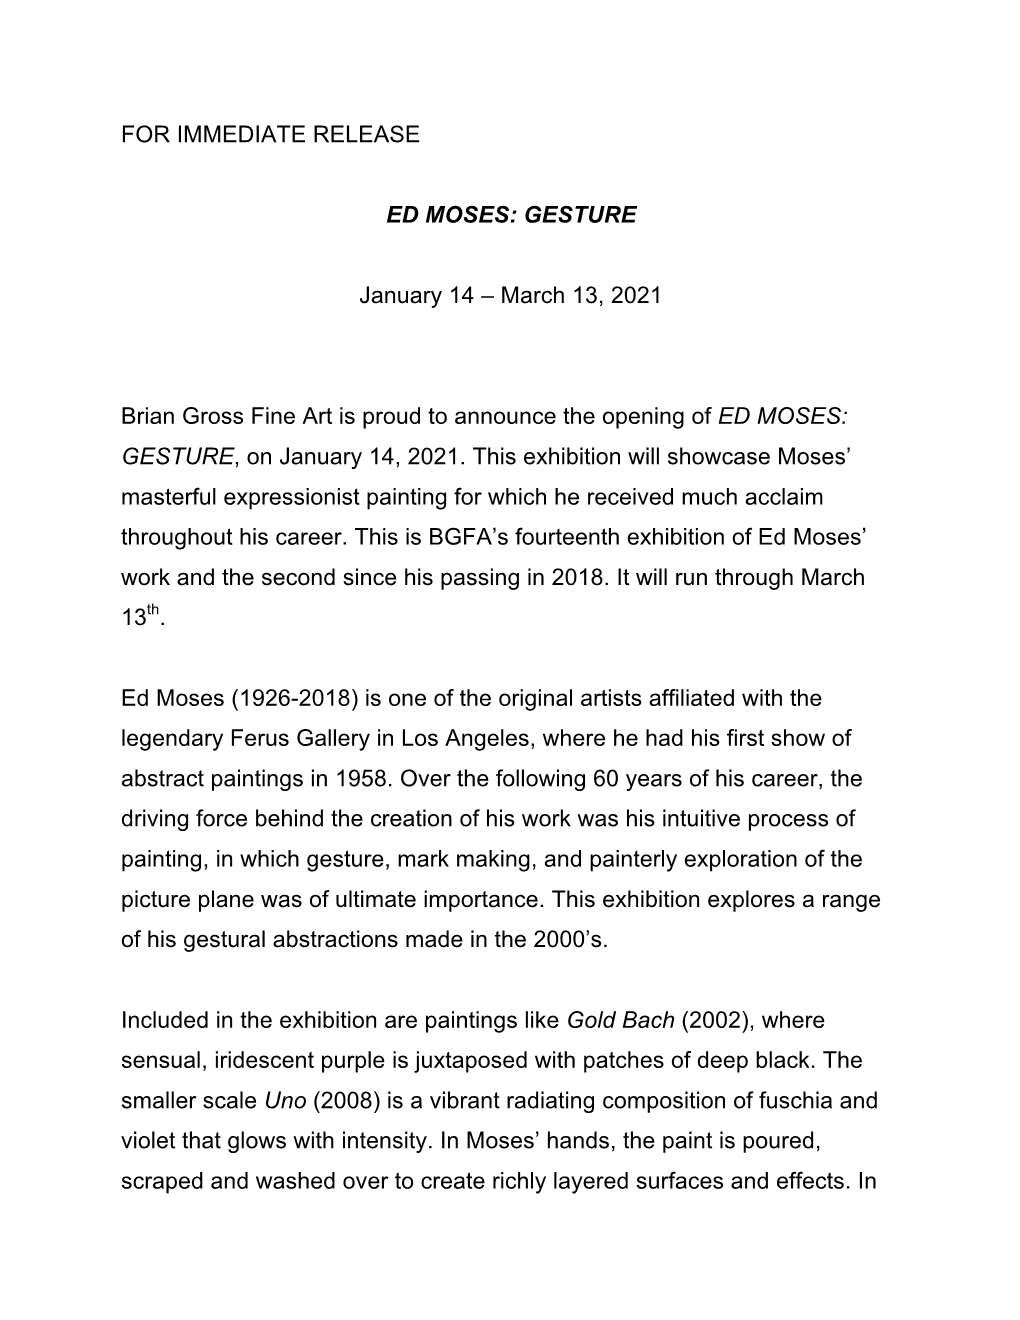 For Immediate Release Ed Moses